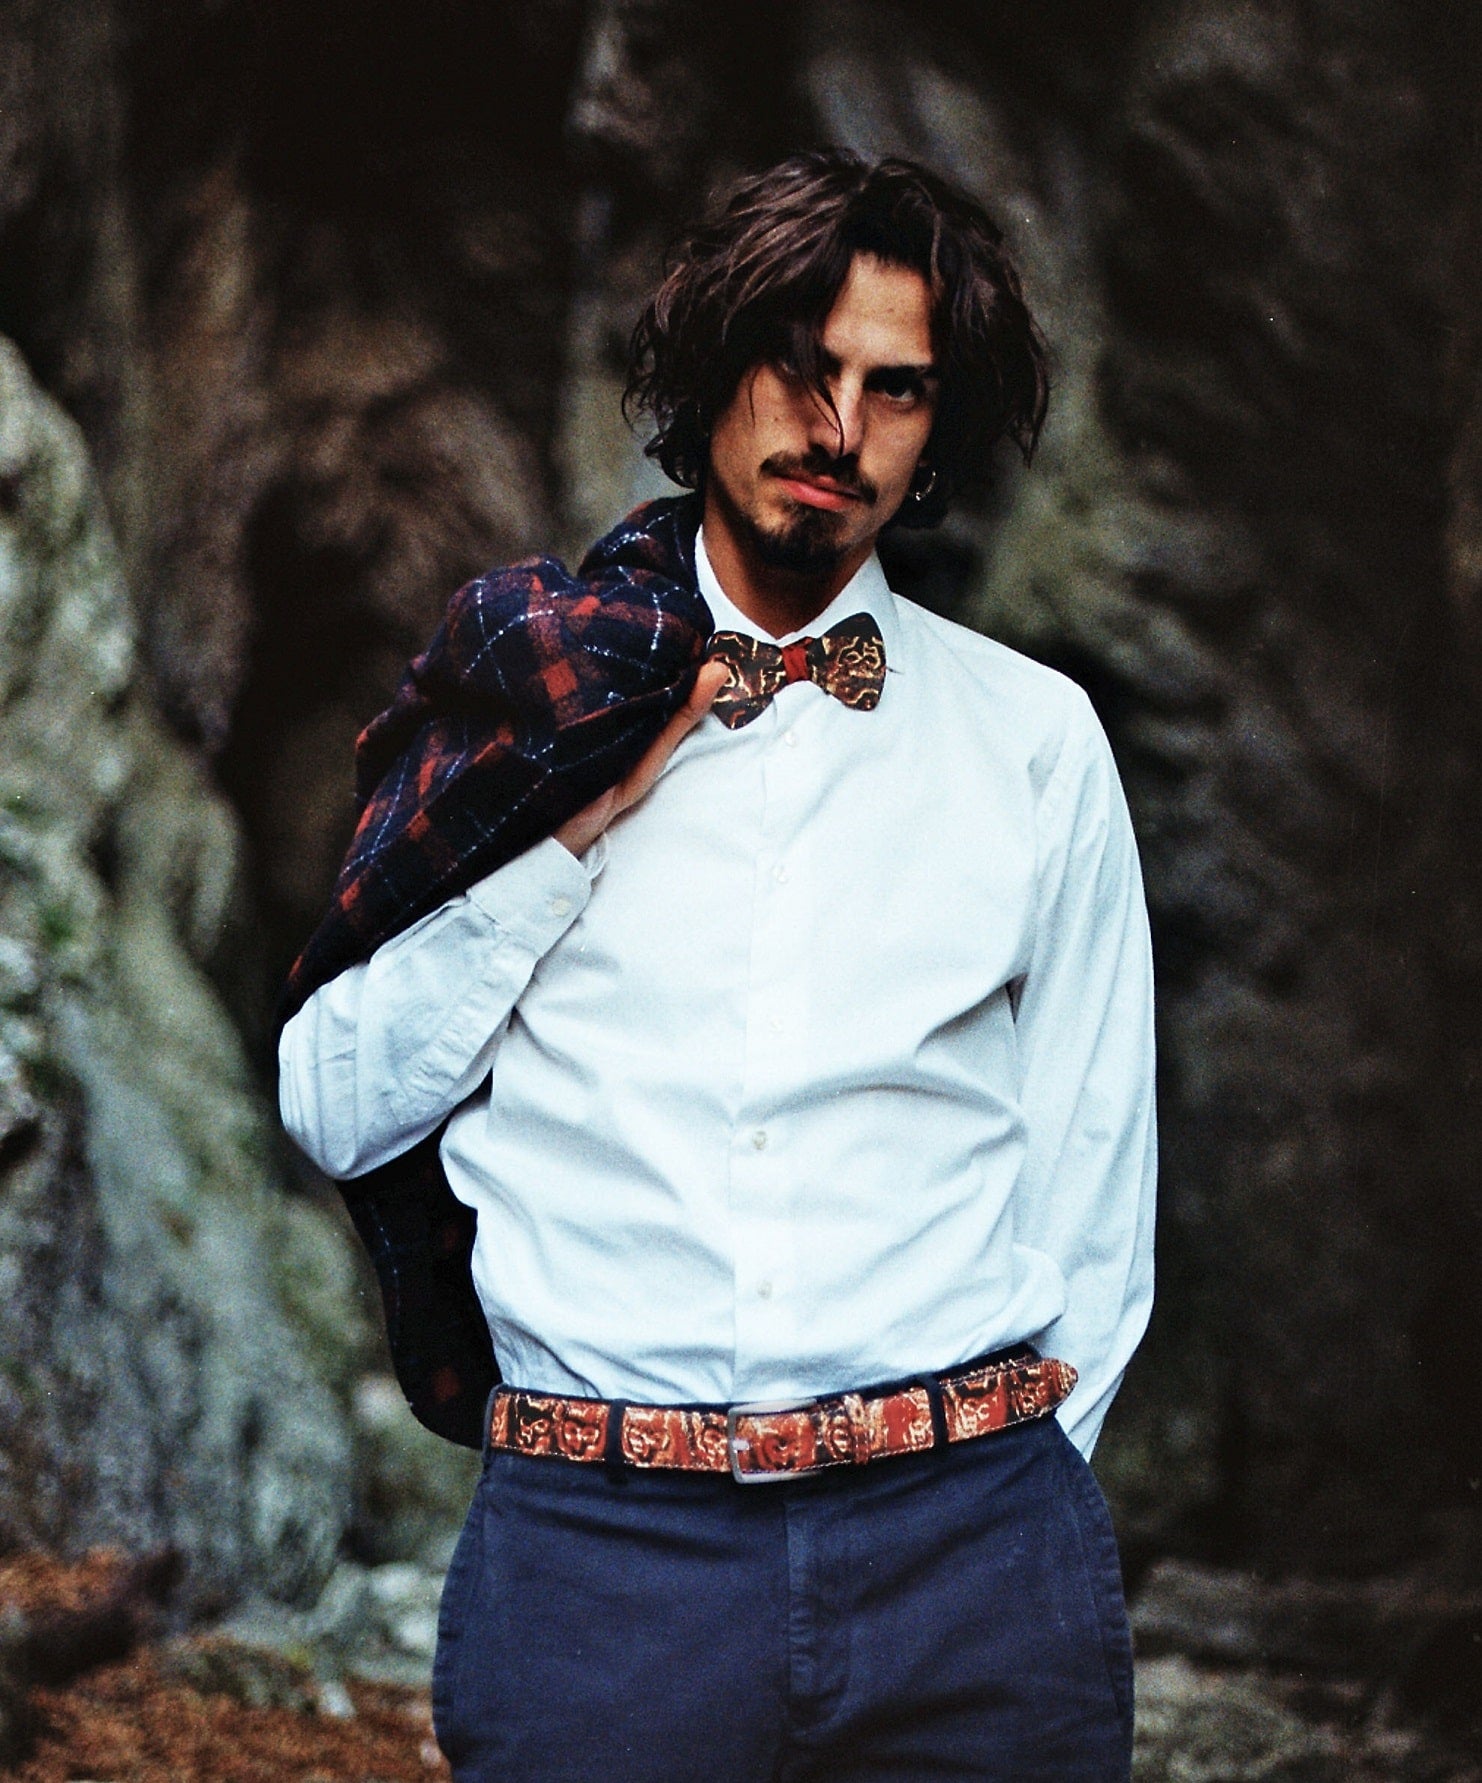 model in shirt wearing matching belt and bow tie